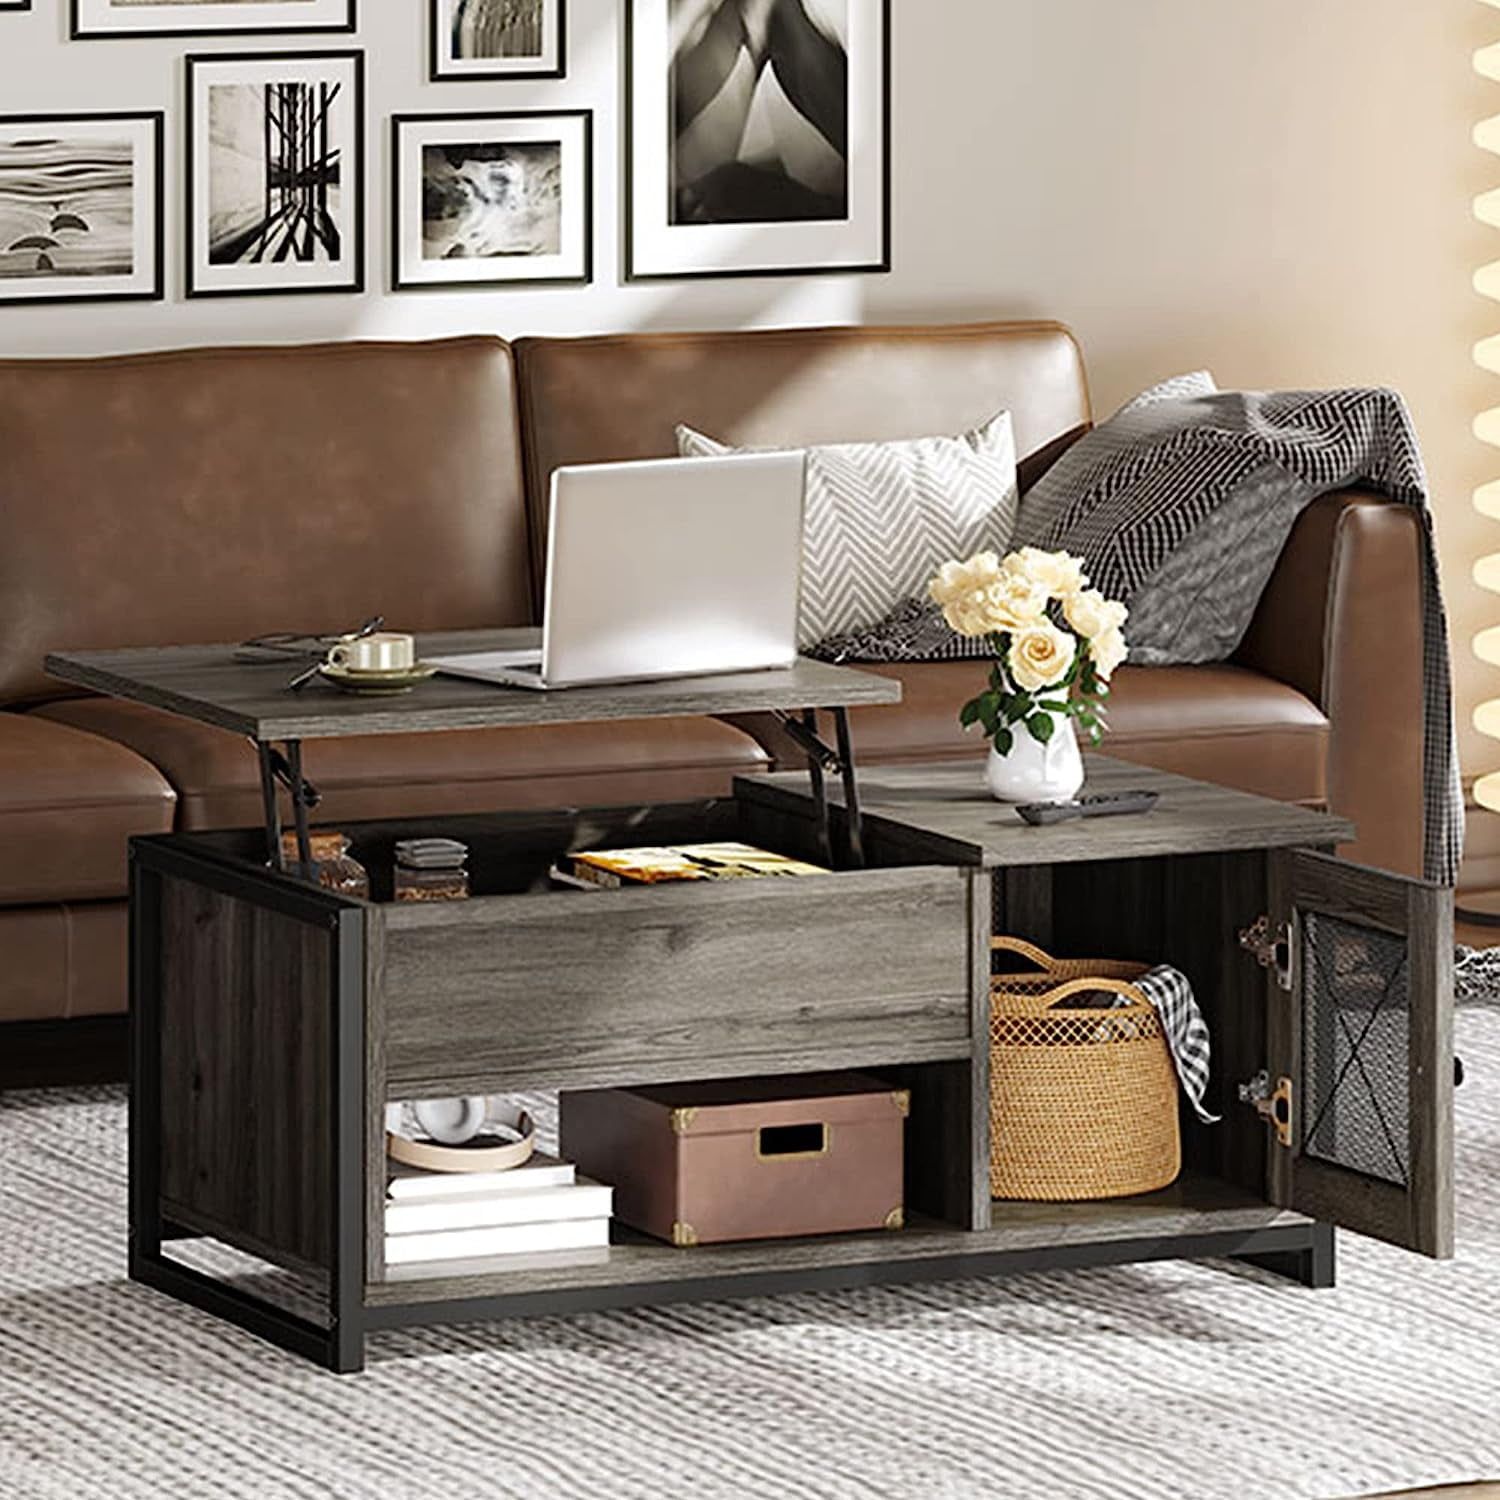 Dextrus Lift Top Coffee Tables With Storage, Double Doors Wood Cocktail  Table For Living Room, Gray Wash – Walmart In Lift Top Coffee Tables With Shelves (View 6 of 15)